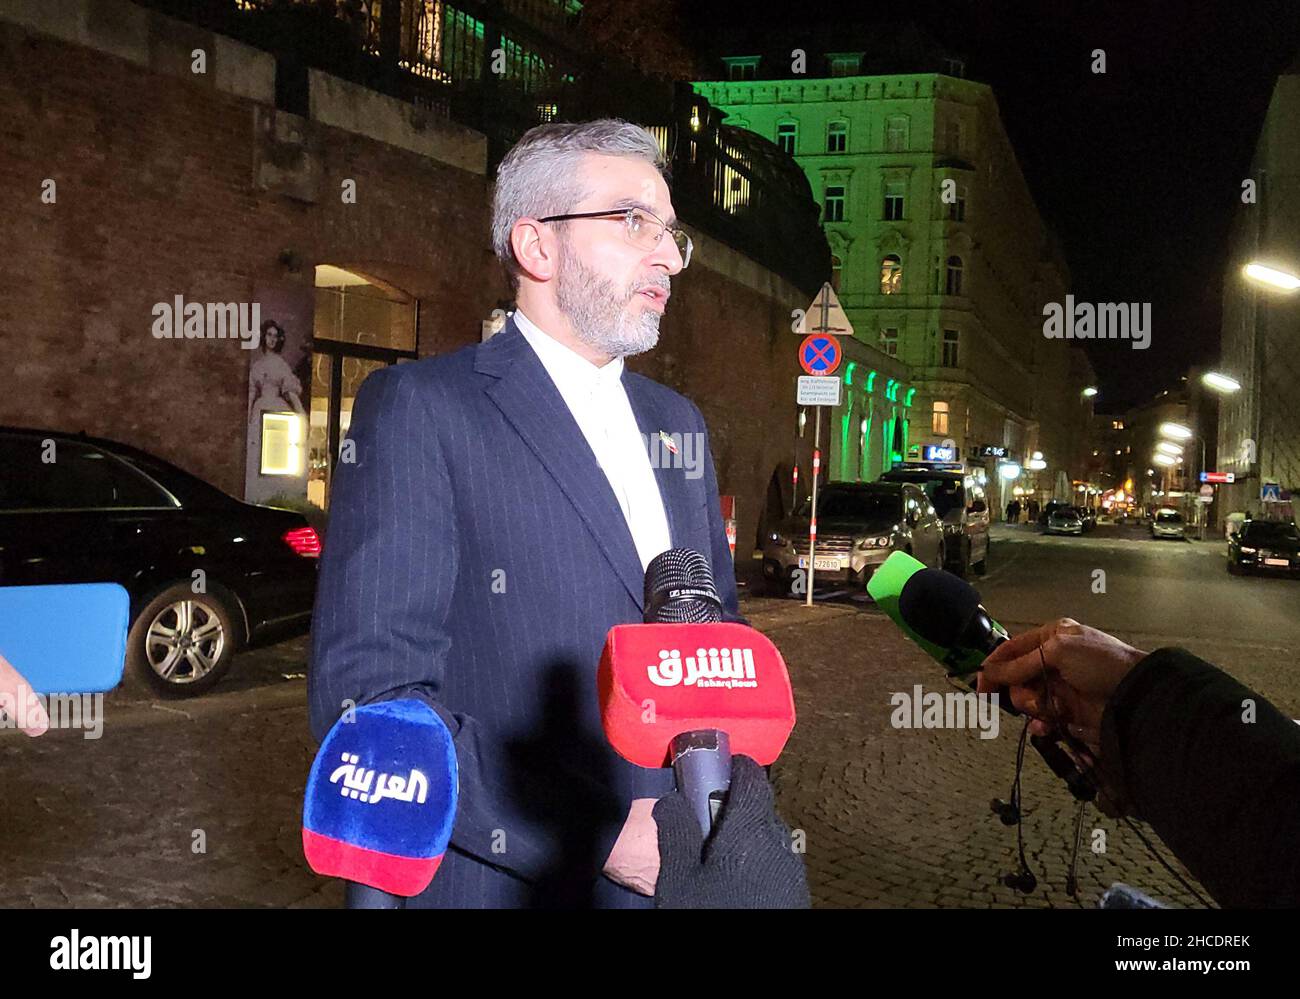 Vienna, Austria. 27th Dec, 2021. Iran's chief nuclear negotiator in the Vienna talks Ali Bagheri Kani speaks to reporters after a meeting of the Joint Comprehensive Plan of Action (JCPOA) Joint Commission in Vienna, Austria, on Dec. 27, 2021. Credit: Guo Chen/Xinhua/Alamy Live News Stock Photo